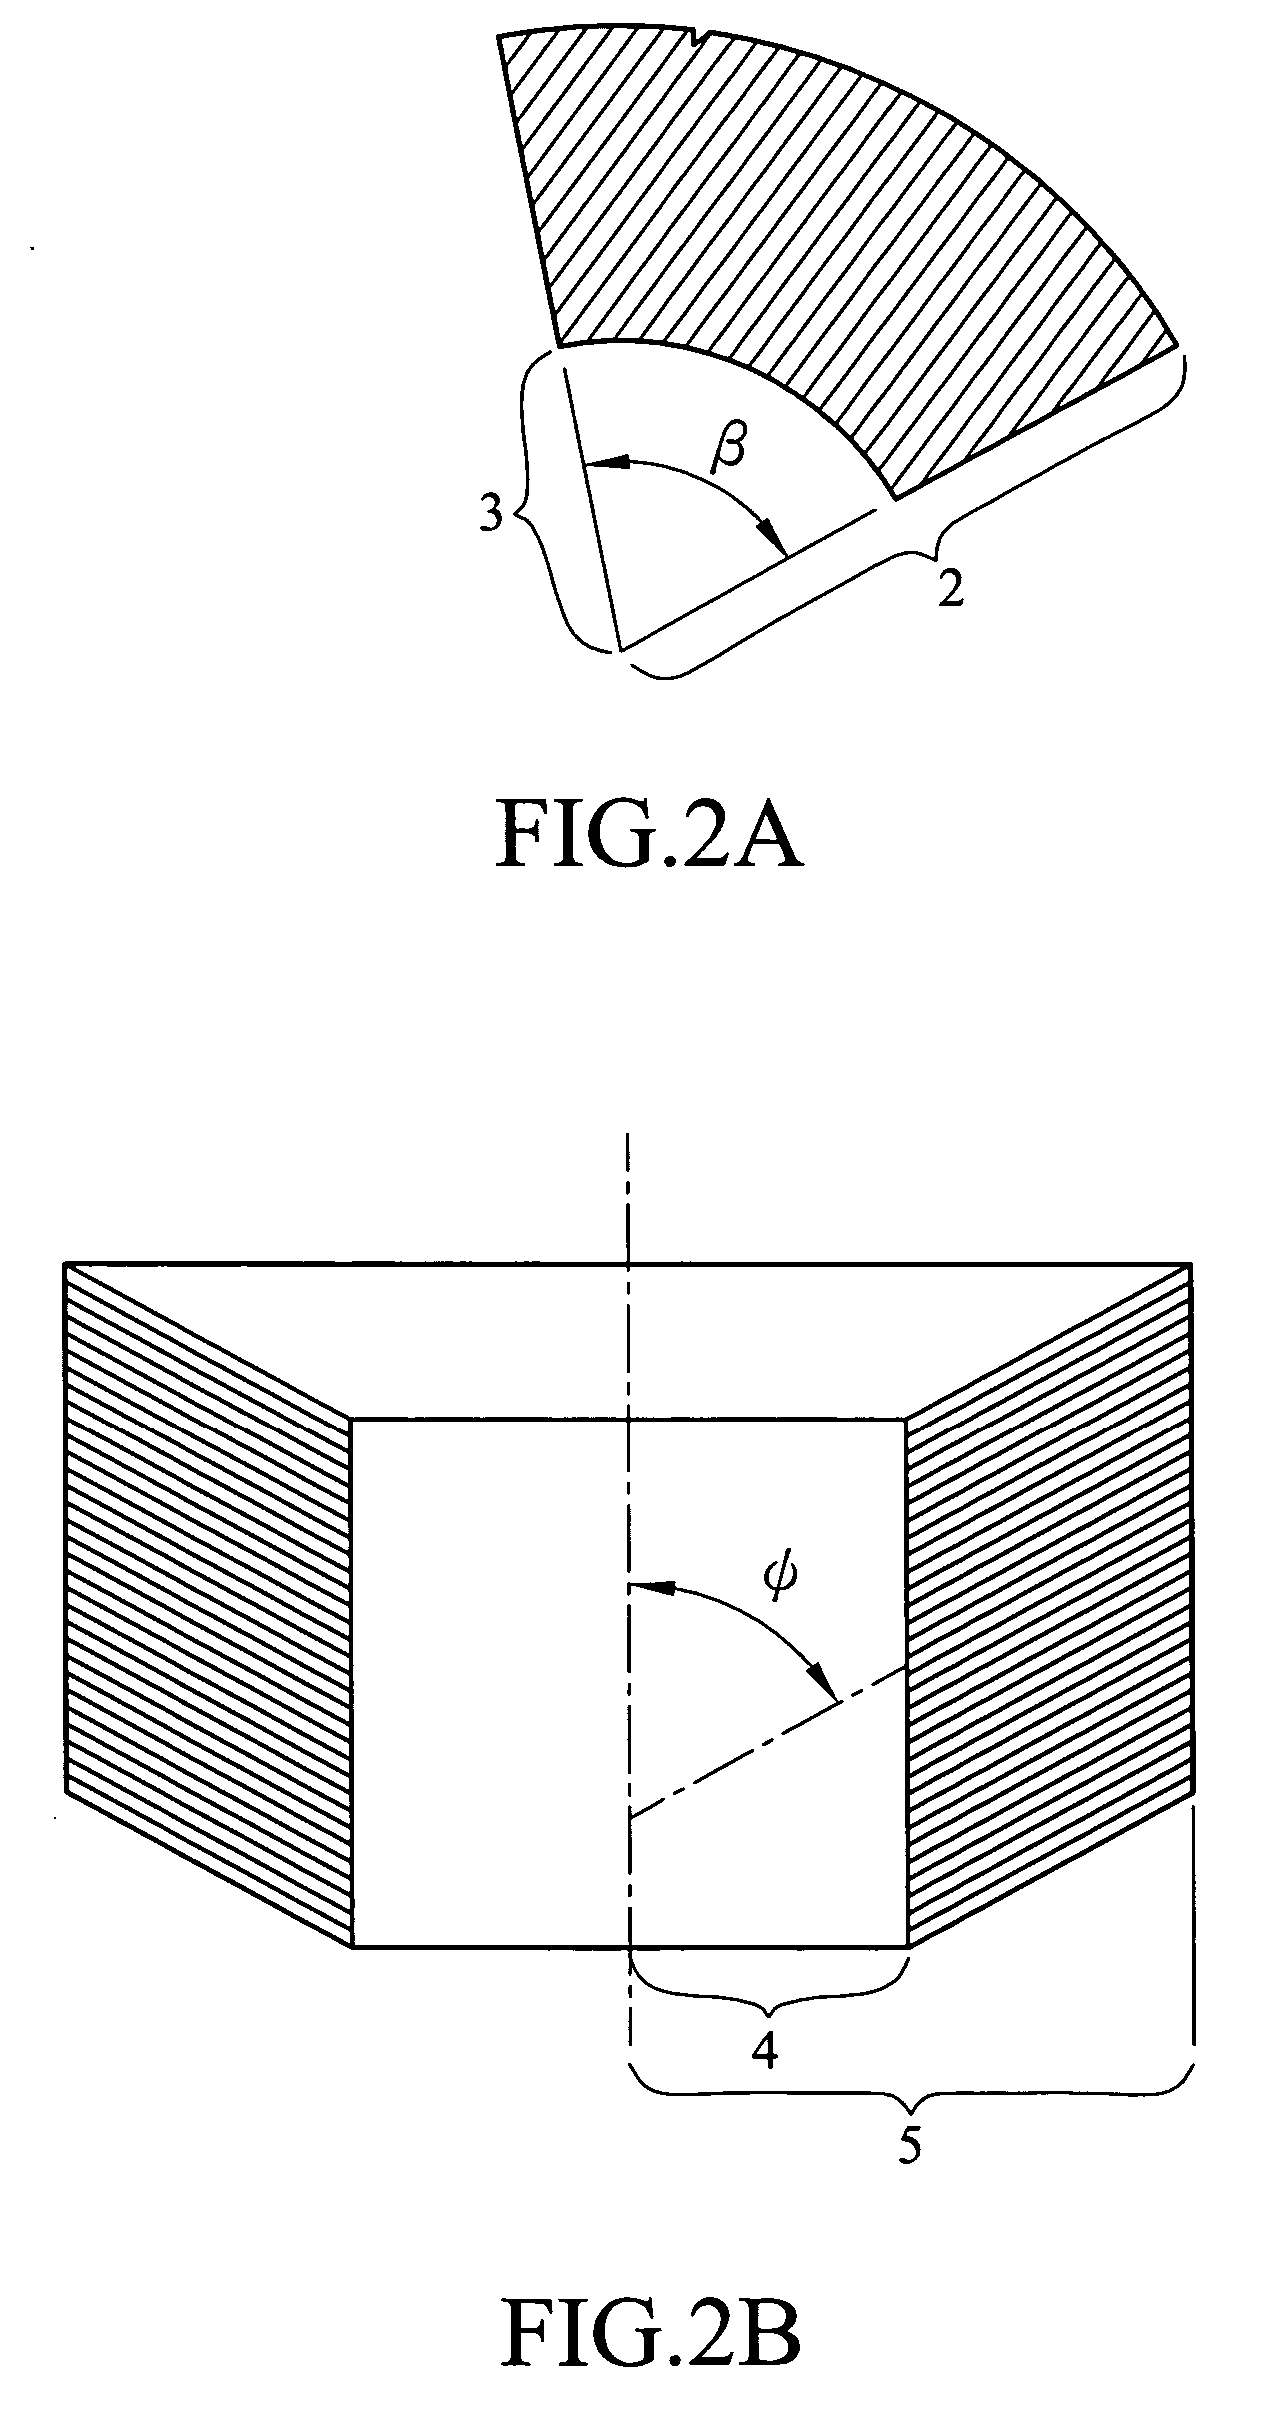 Process of fabricating a laminated hollow composite cylinder with an arranged ply angle